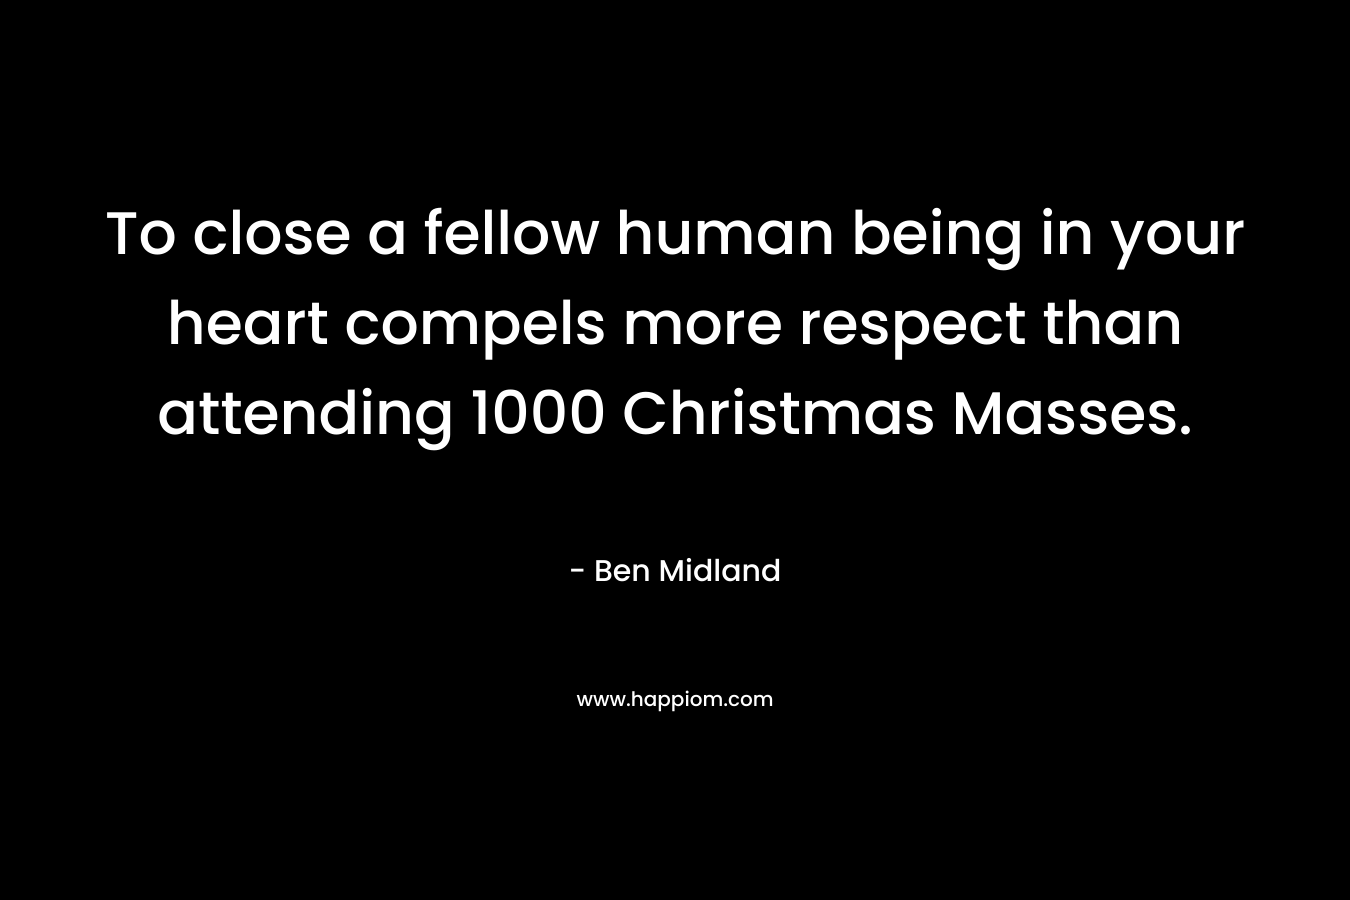 To close a fellow human being in your heart compels more respect than attending 1000 Christmas Masses. – Ben Midland